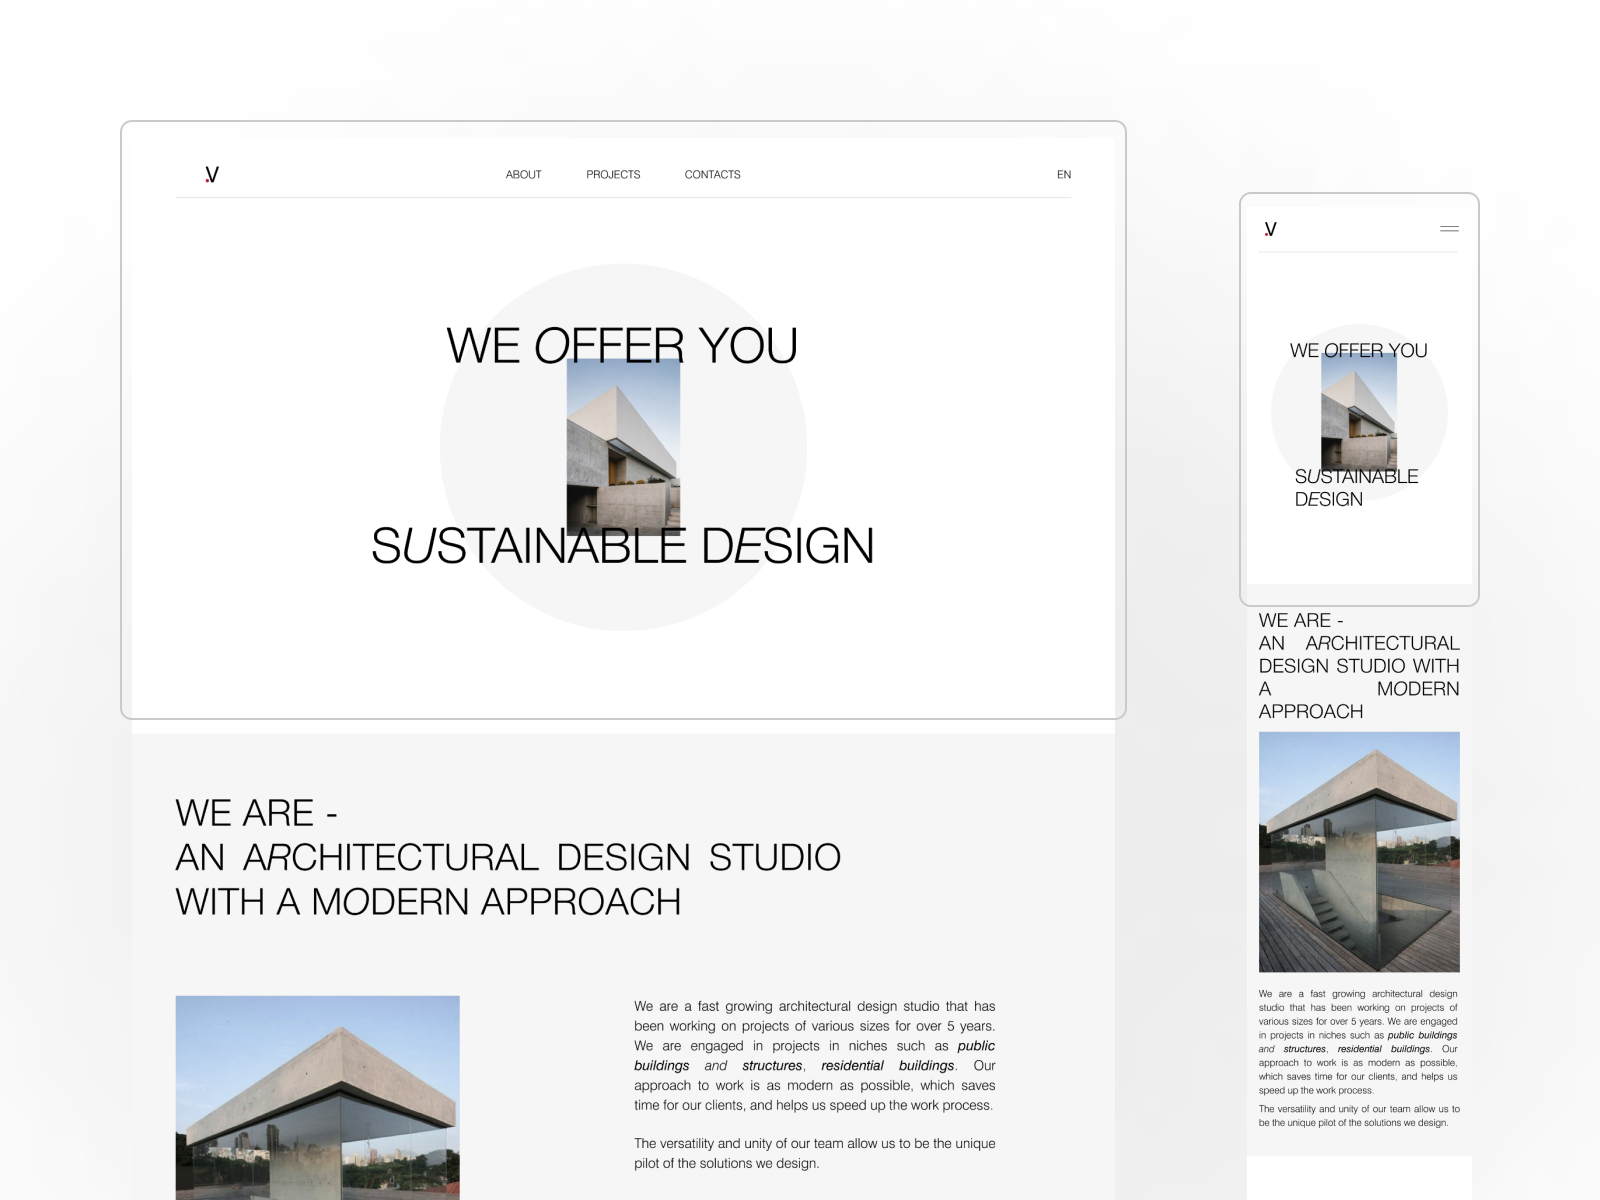 Architectural design studio website by Amelia on Dribbble